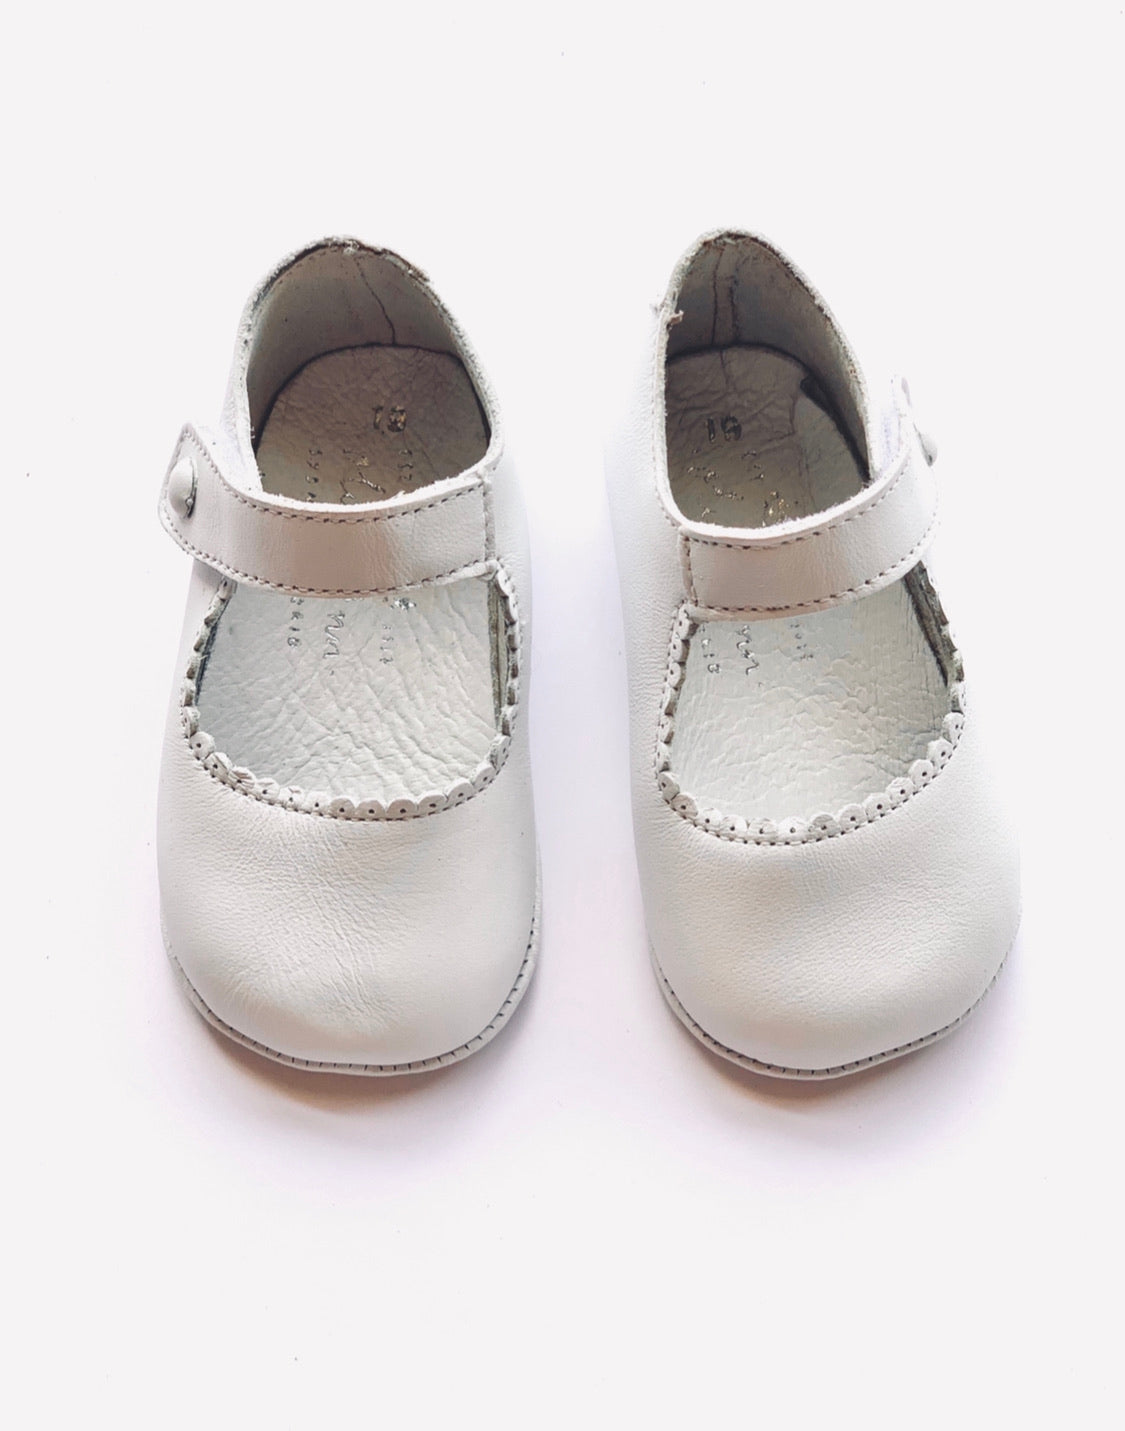 Pearl leather shoes for baby and toddler girls, made in a traditional, 'mary jane' style. They have a bar strap and pretty scalloped edge. Ideal for any day occasion, parties, baptism etc.